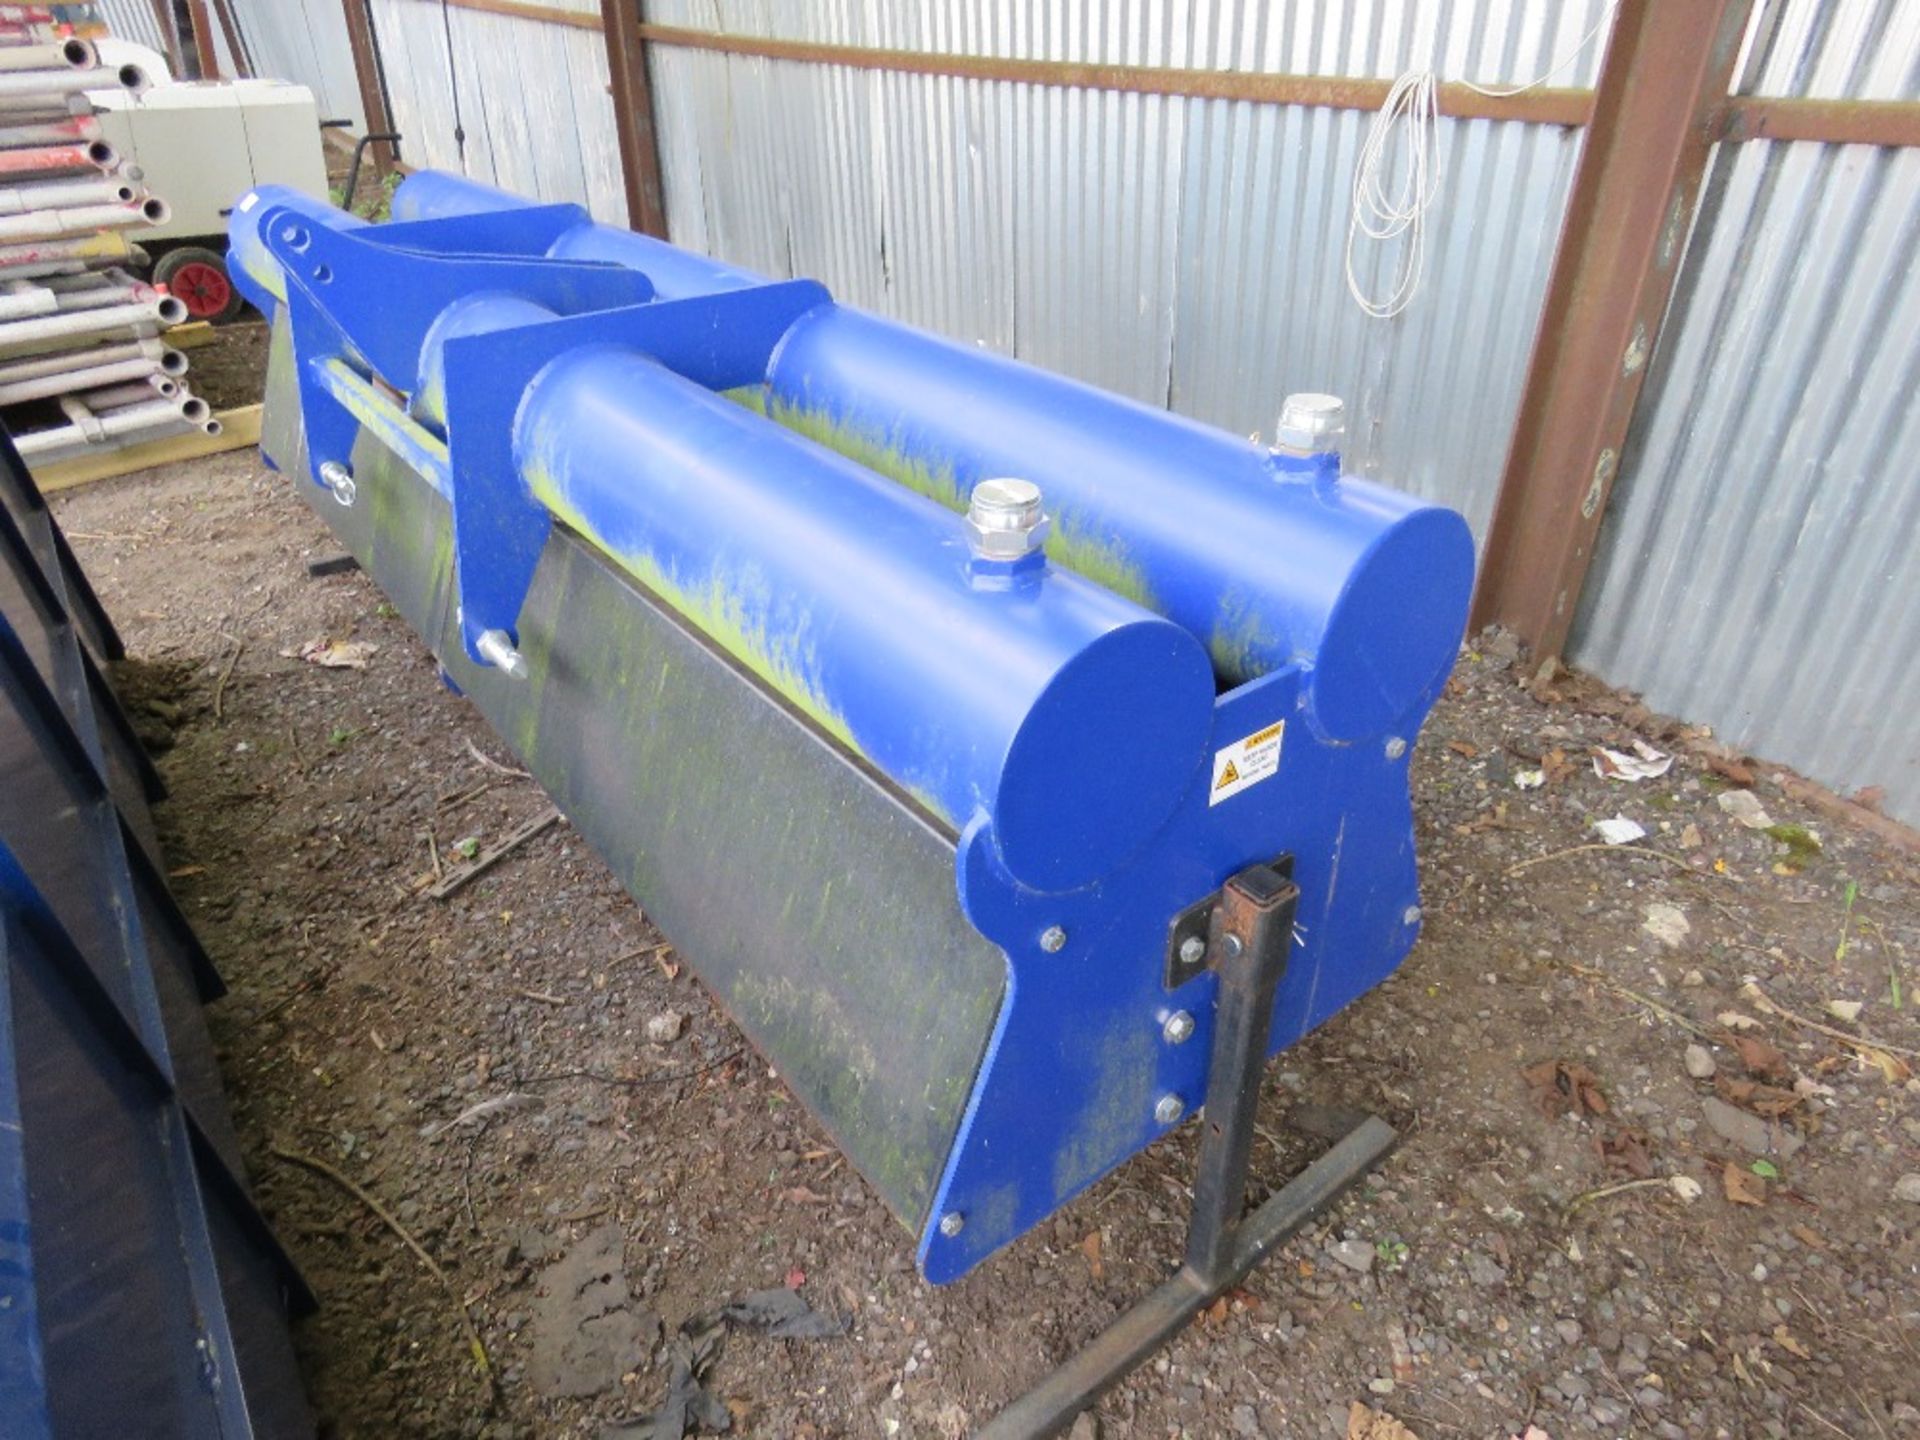 SPITFIRE HEAVY DUTY SLITTER WITH WATER BALASTED FRAME. LITTLE USED, APPROX 8 FT. - Image 5 of 6